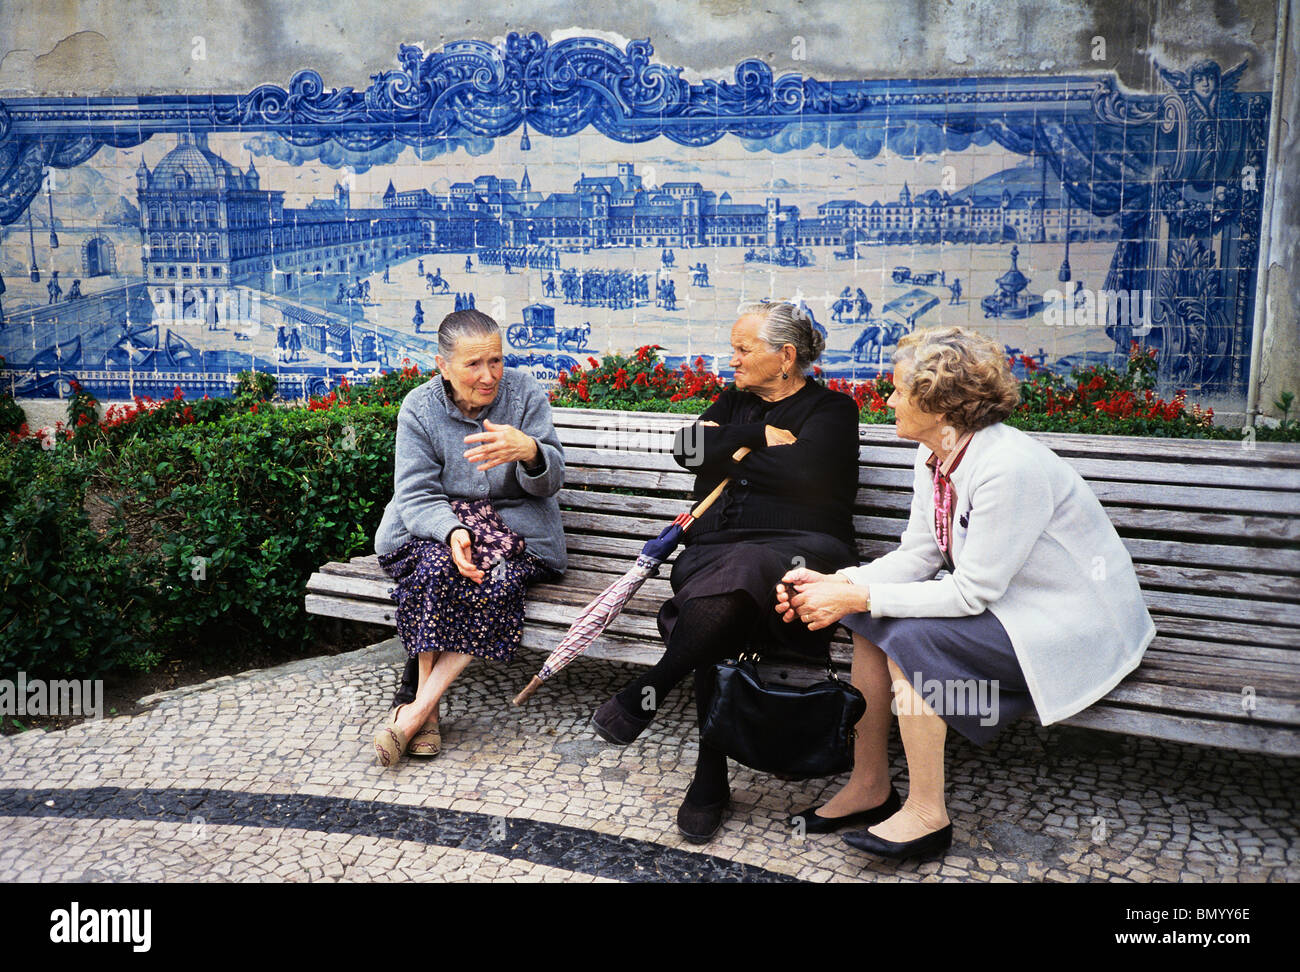 Women chat beside a tile panel in Lisbon's Alfama that shows the Palace Square as it was before the Great Earthquake o 1755 Stock Photo